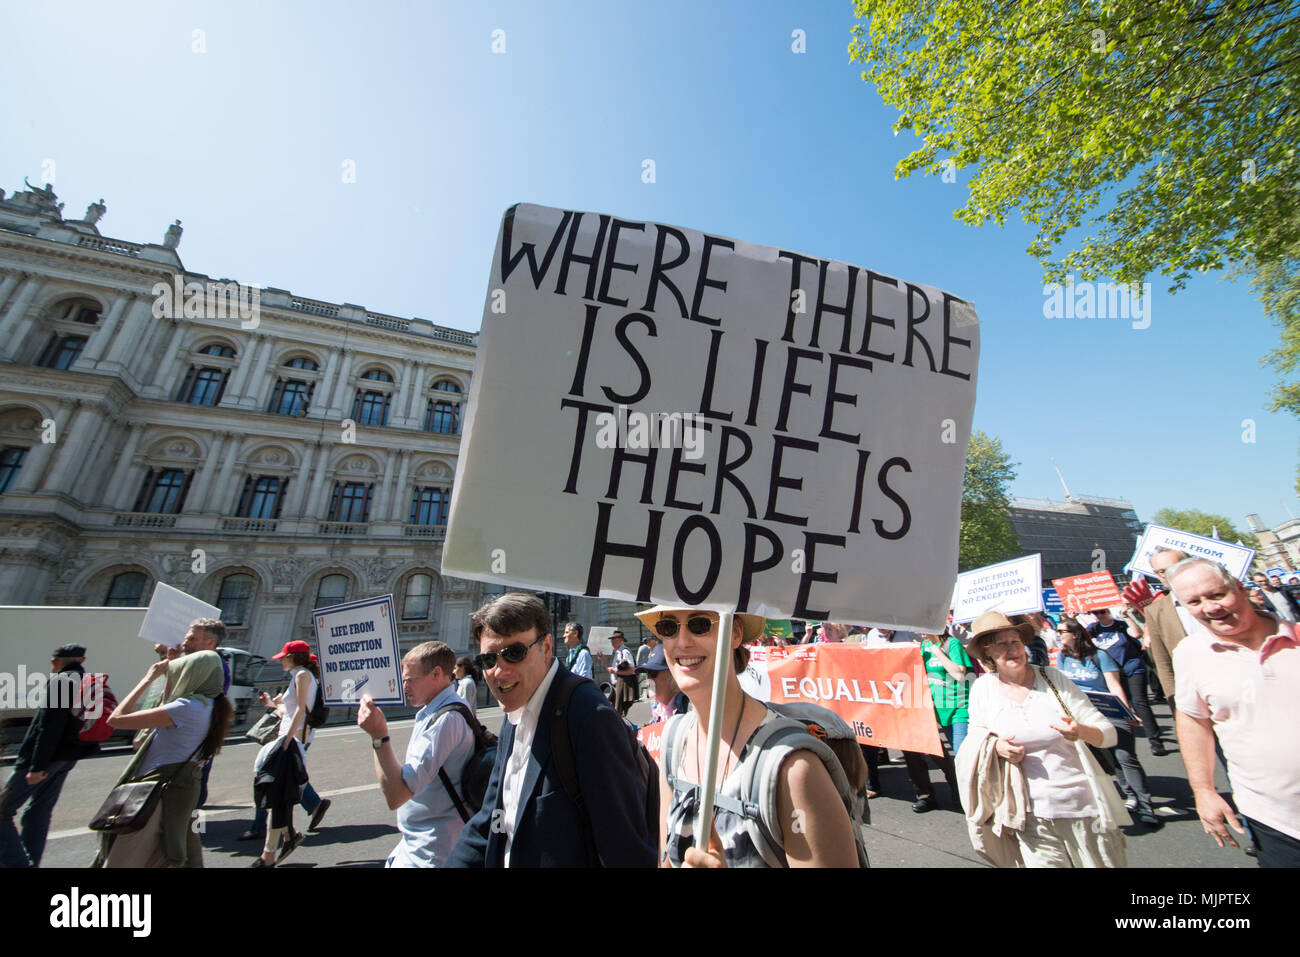 London, UK, 5 May 2018. The marches come just weeks ahead of a referendum in Ireland on the eighth amendment. Ireland goes to the polls on May 25. They will be asked whether they want to retain the eighth amendment of the constitution which gives equal rights to the mother and her unborn child. 5th May, 2018. Credit: Velar Grant/ZUMA Wire/Alamy Live News Stock Photo